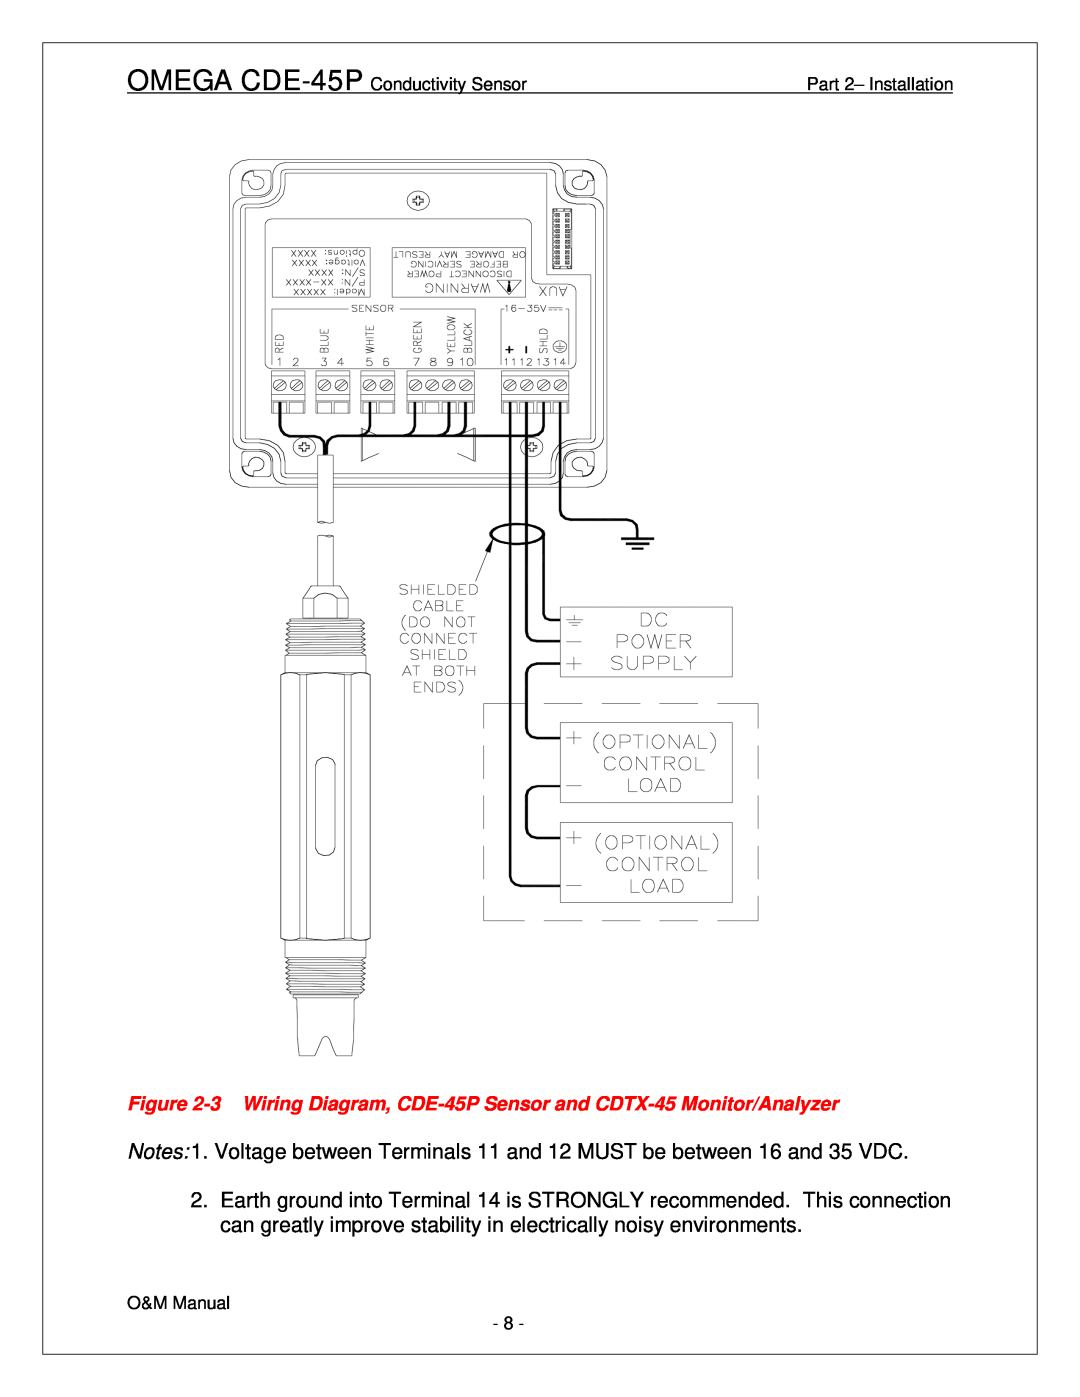 Omega Engineering CDE-45P manual Notes1. Voltage between Terminals 11 and 12 MUST be between 16 and 35 VDC 